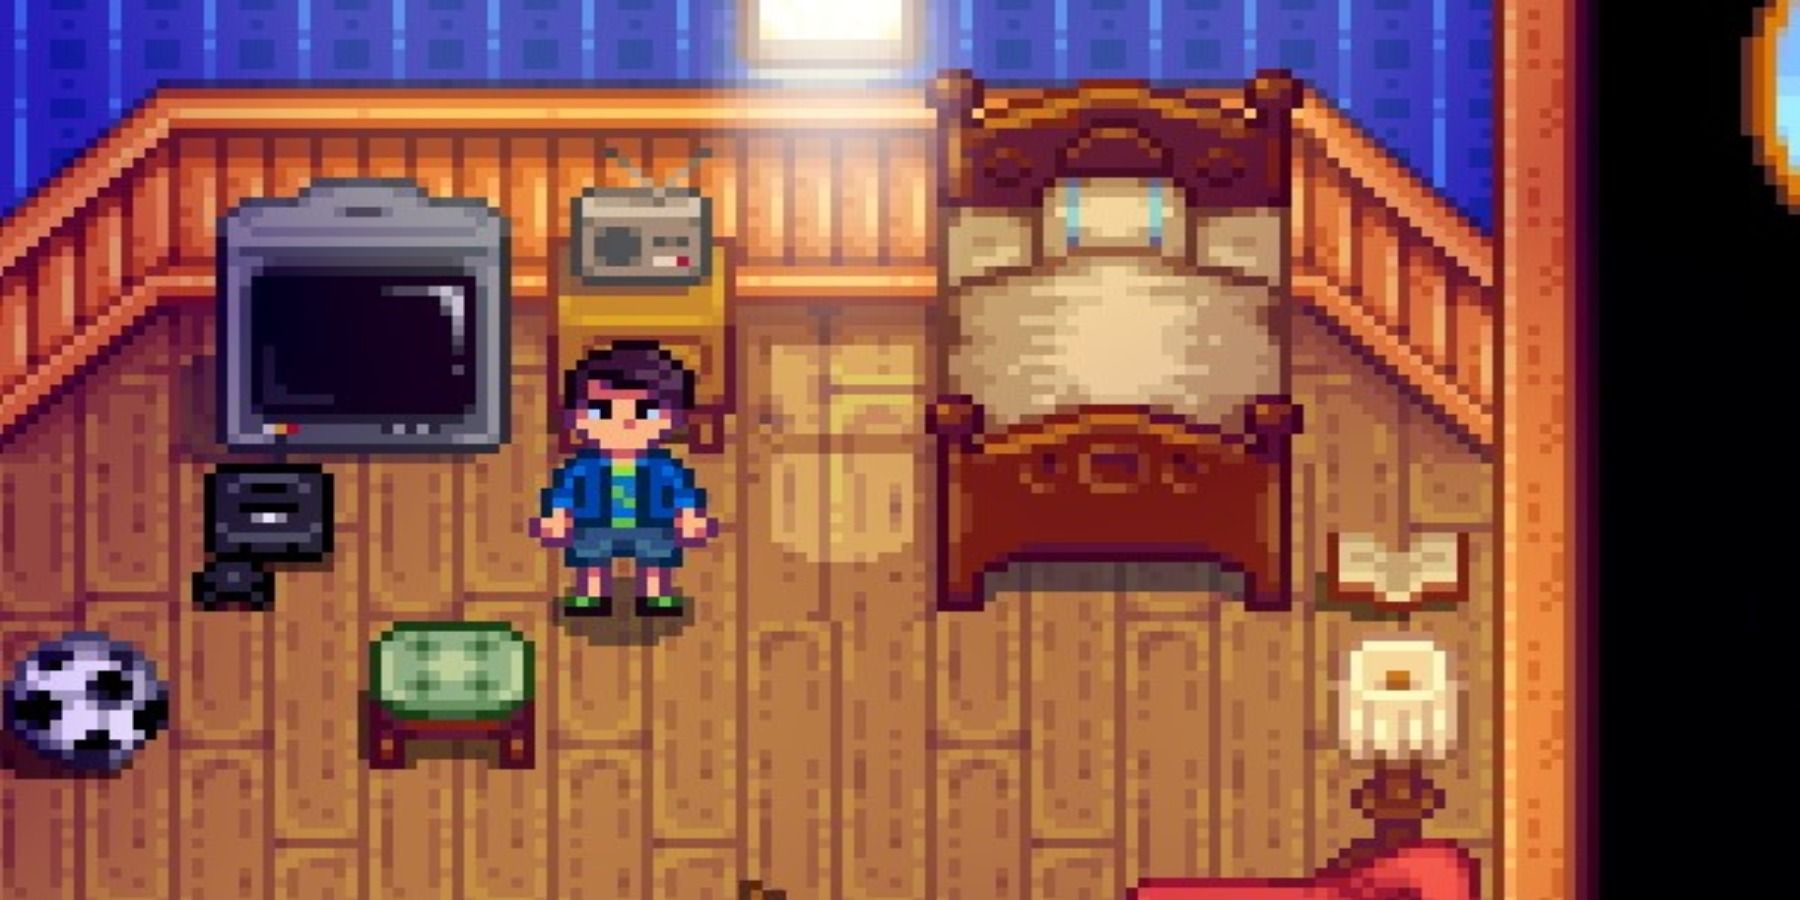 Shane in his bedroom at Marnie's house in Stardew Valley